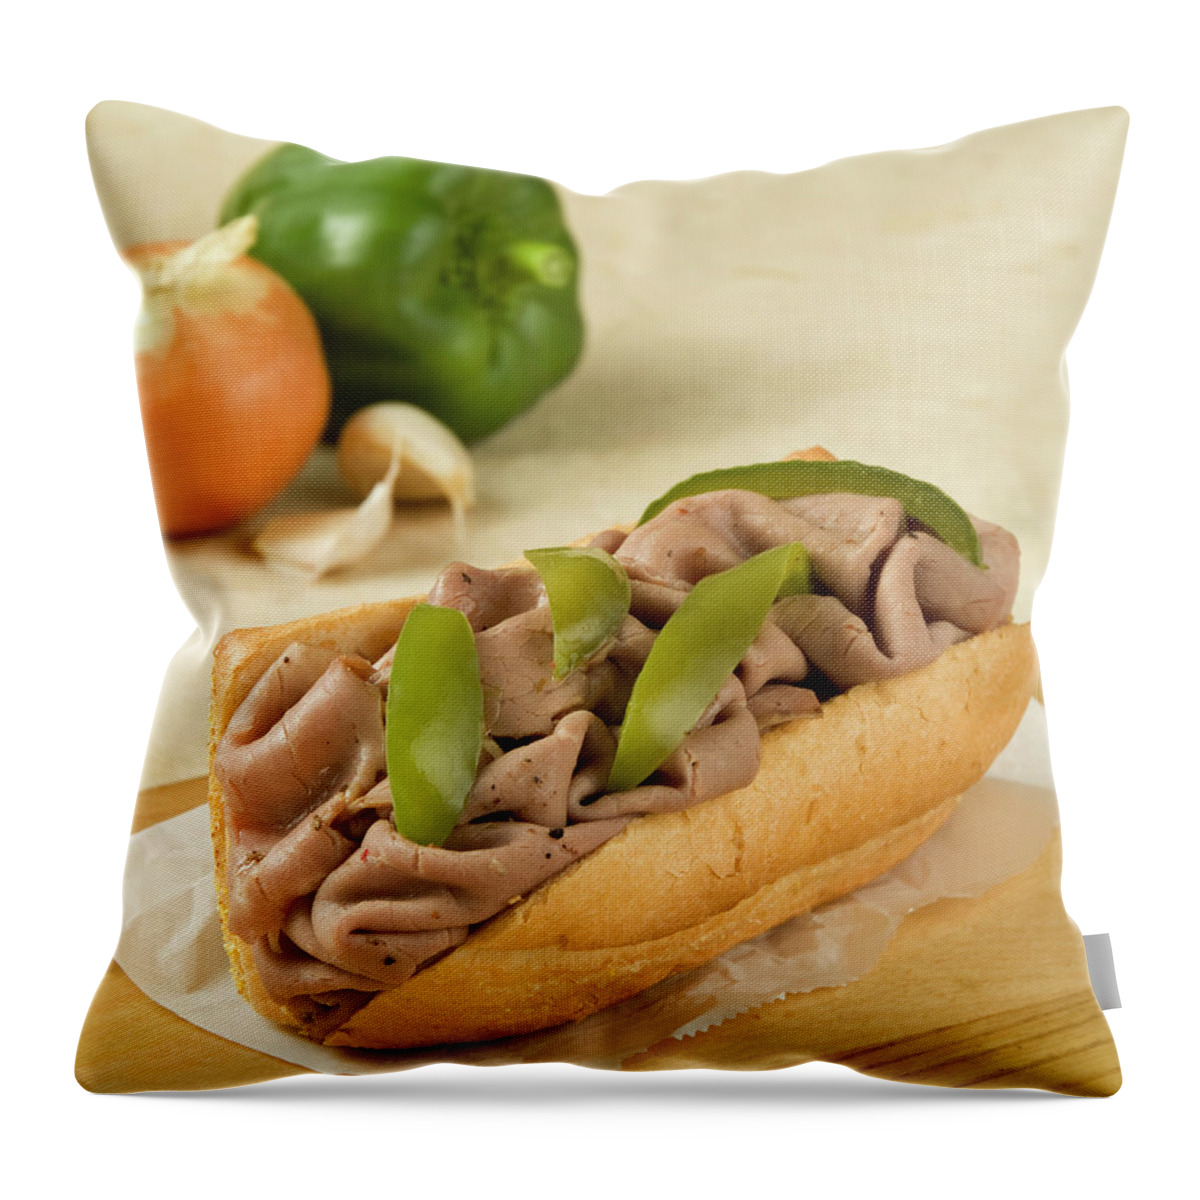 Bun Throw Pillow featuring the photograph Italian Beef Sandwich With Green Pepper by Thomas Firak Photography